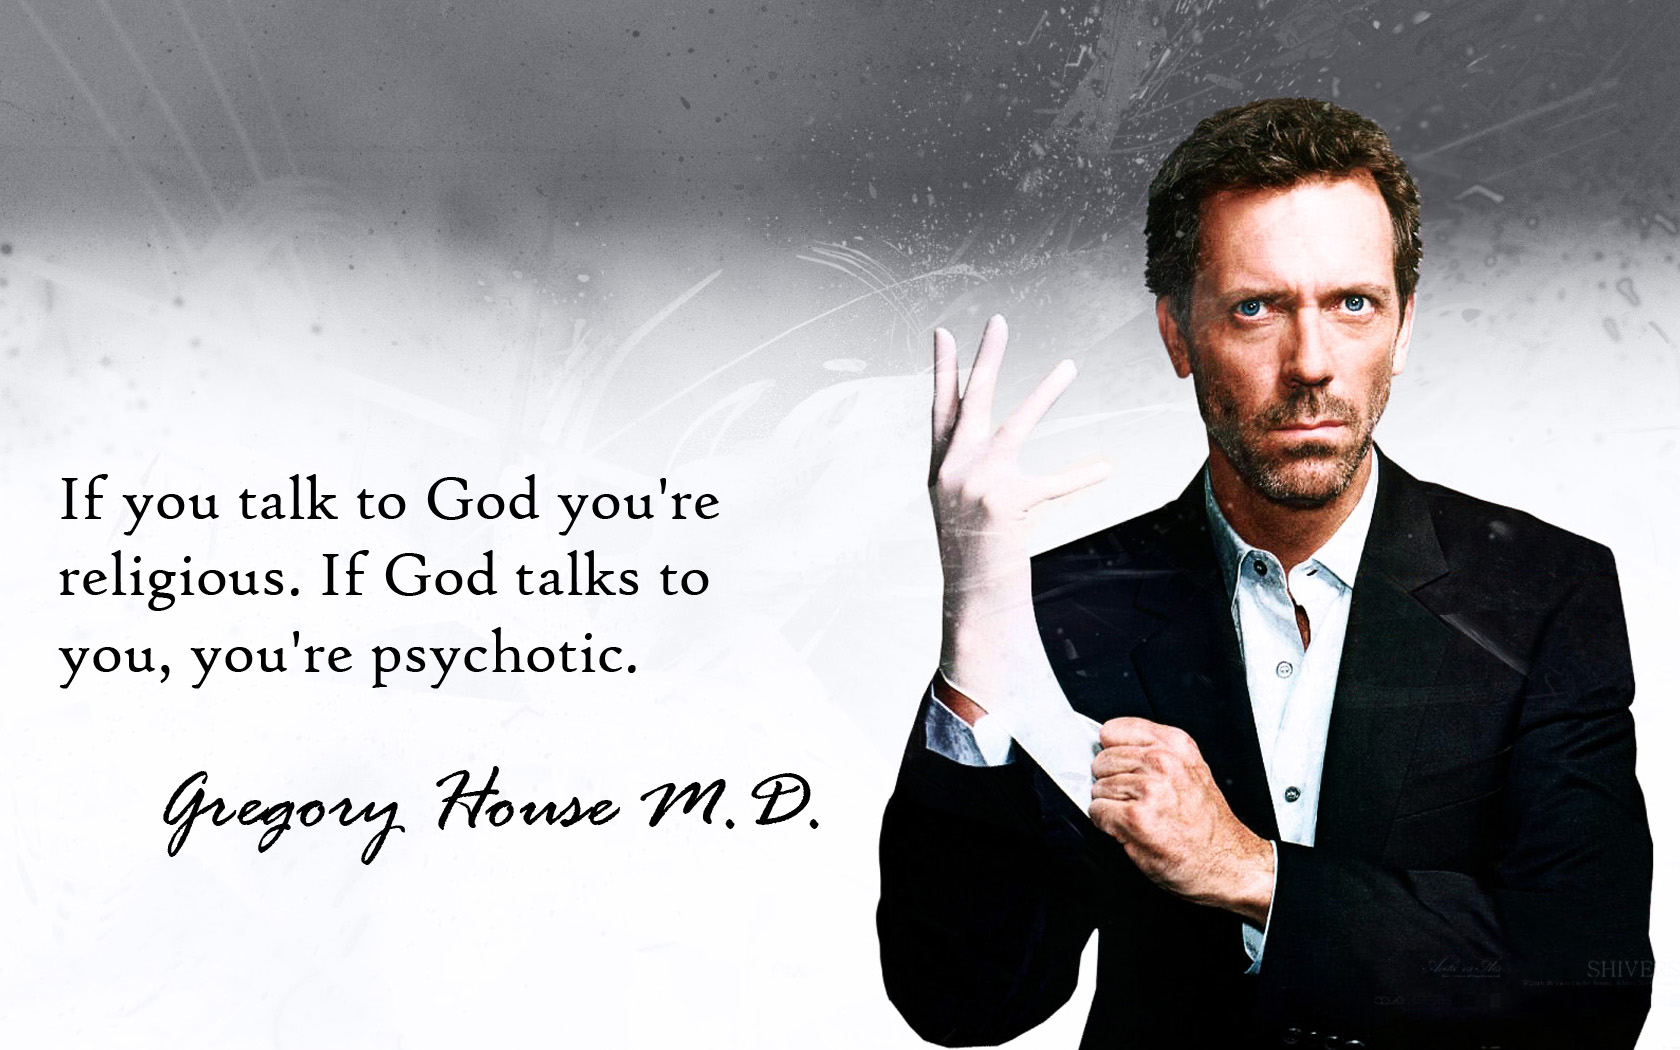 Hugh Laurie as Gregory House